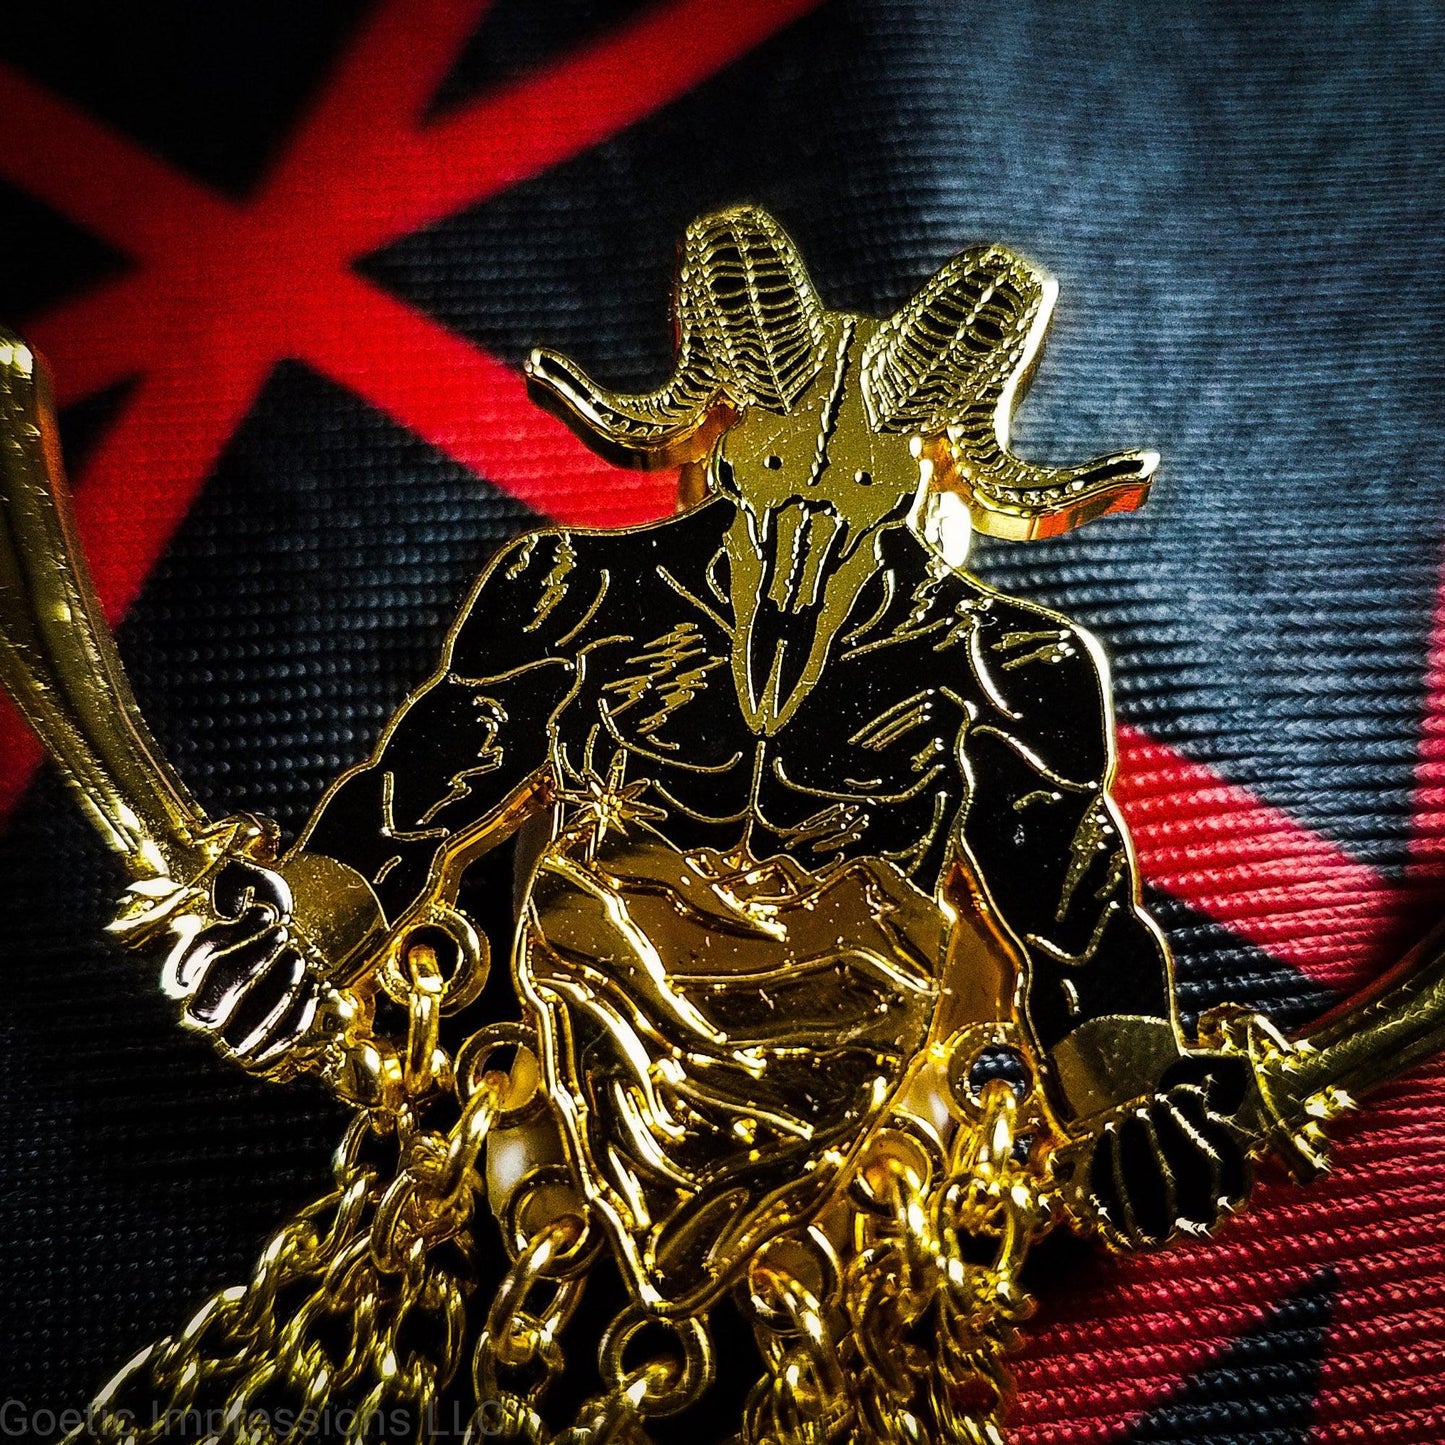 A close up of a black and gold enamel pin of the demon Azazel. Azazel has a ram skull of a head and a human body with scars. He is holding a scimitar in each hand.